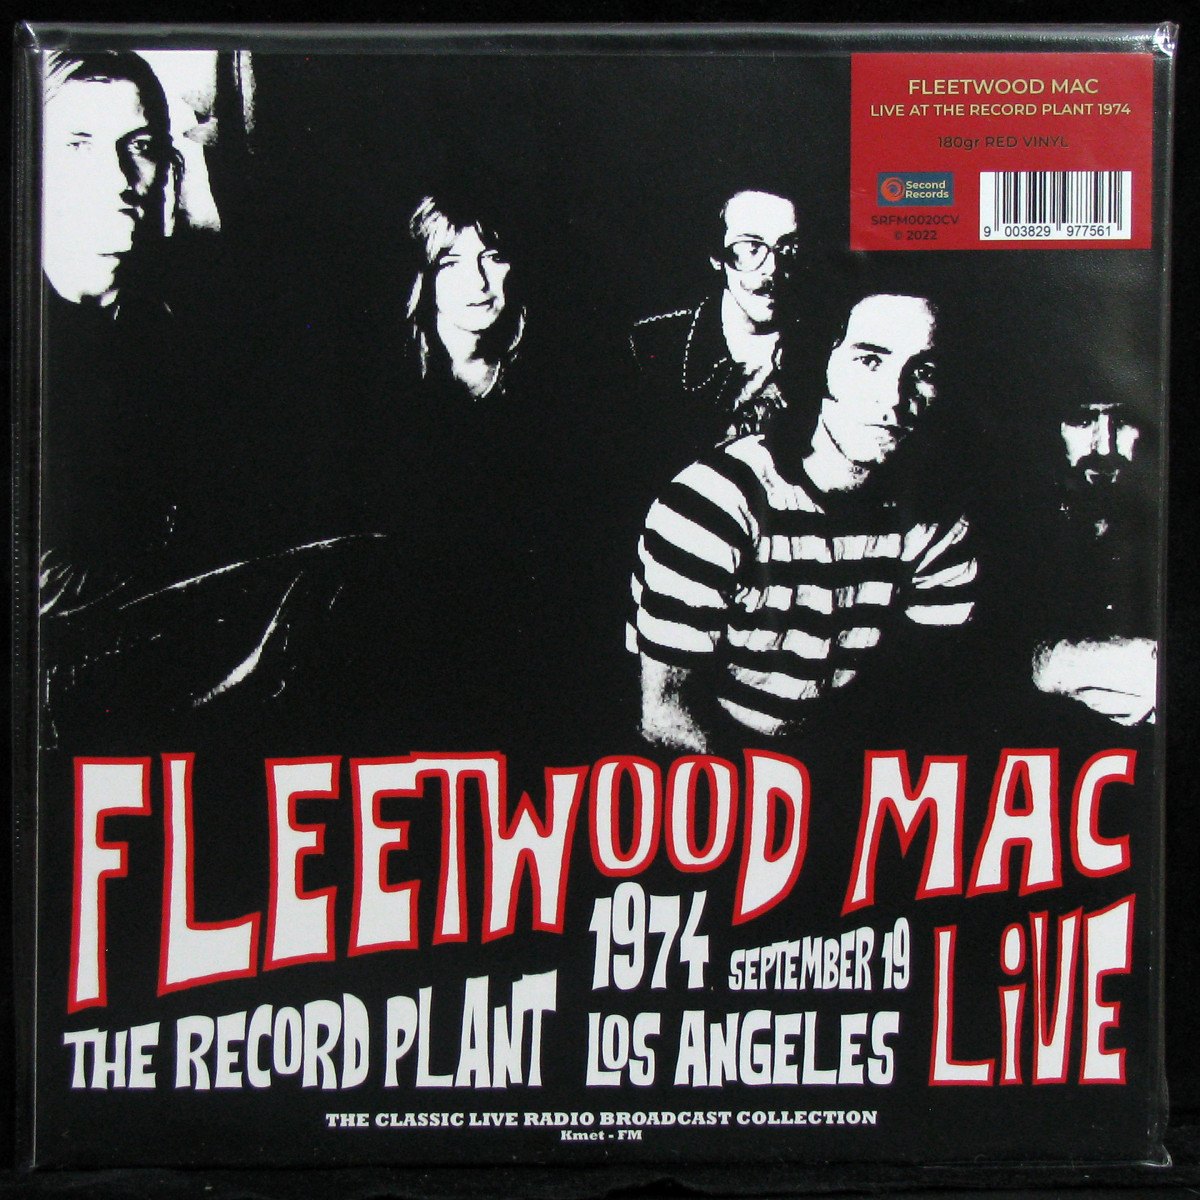 Live (The Record Plant Los Angeles 1974 19th September)